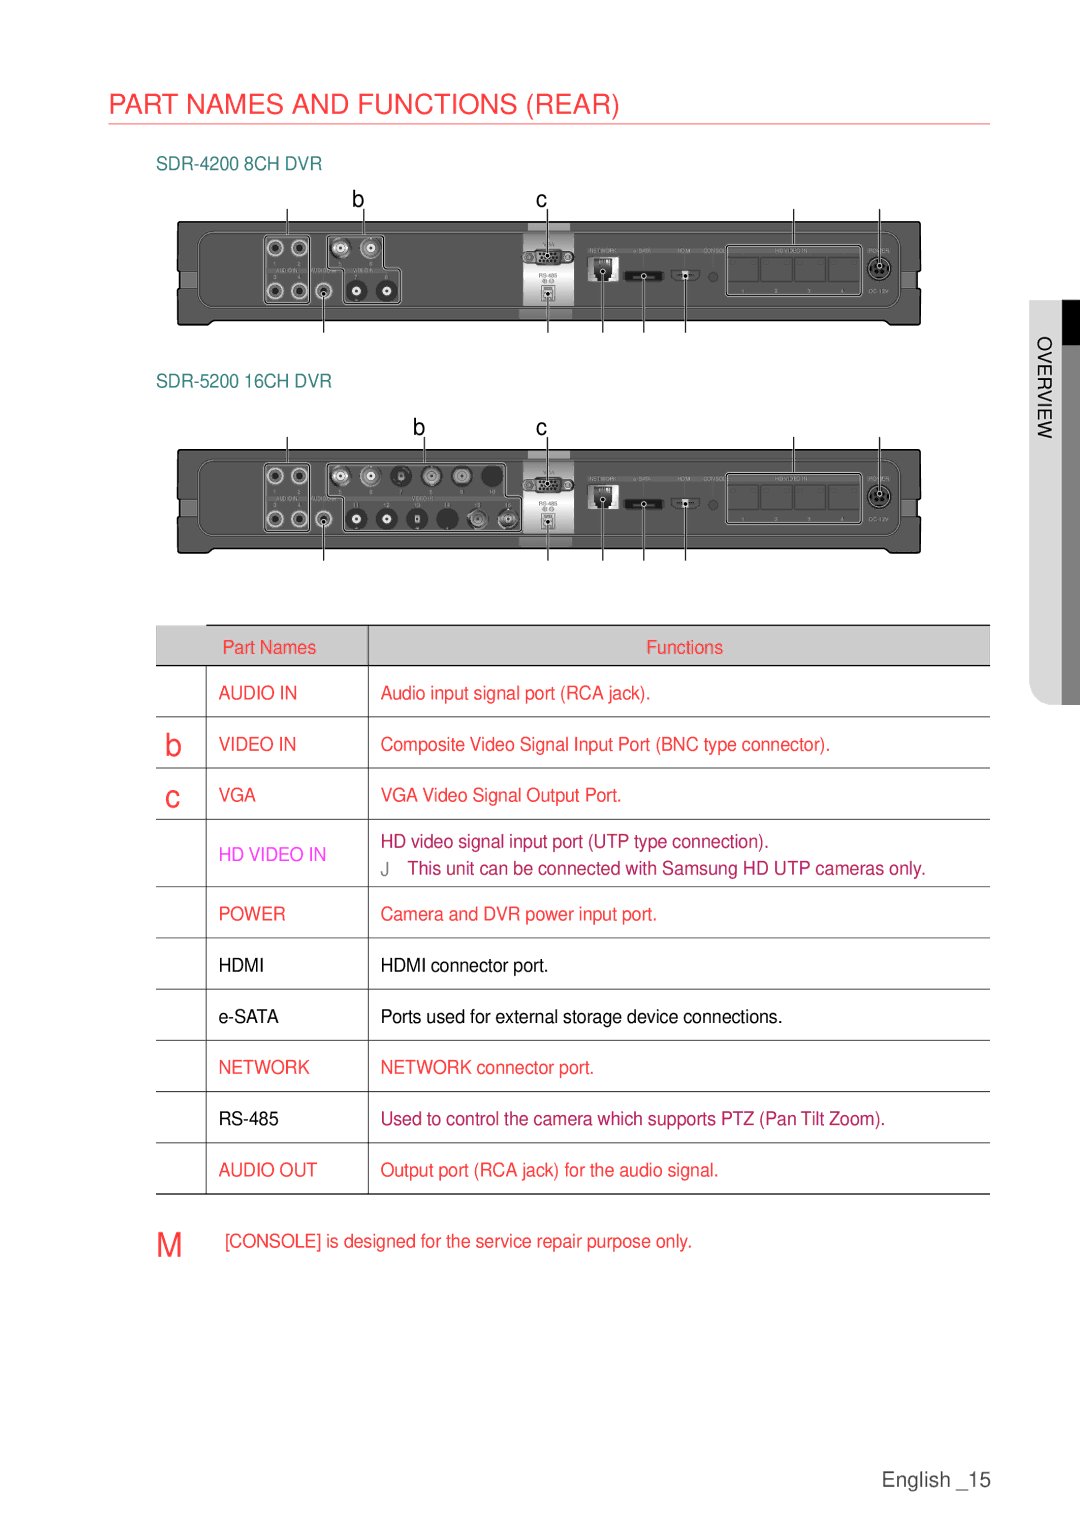 Samsung SDHP4080 user manual Part Names and Functions Rear 